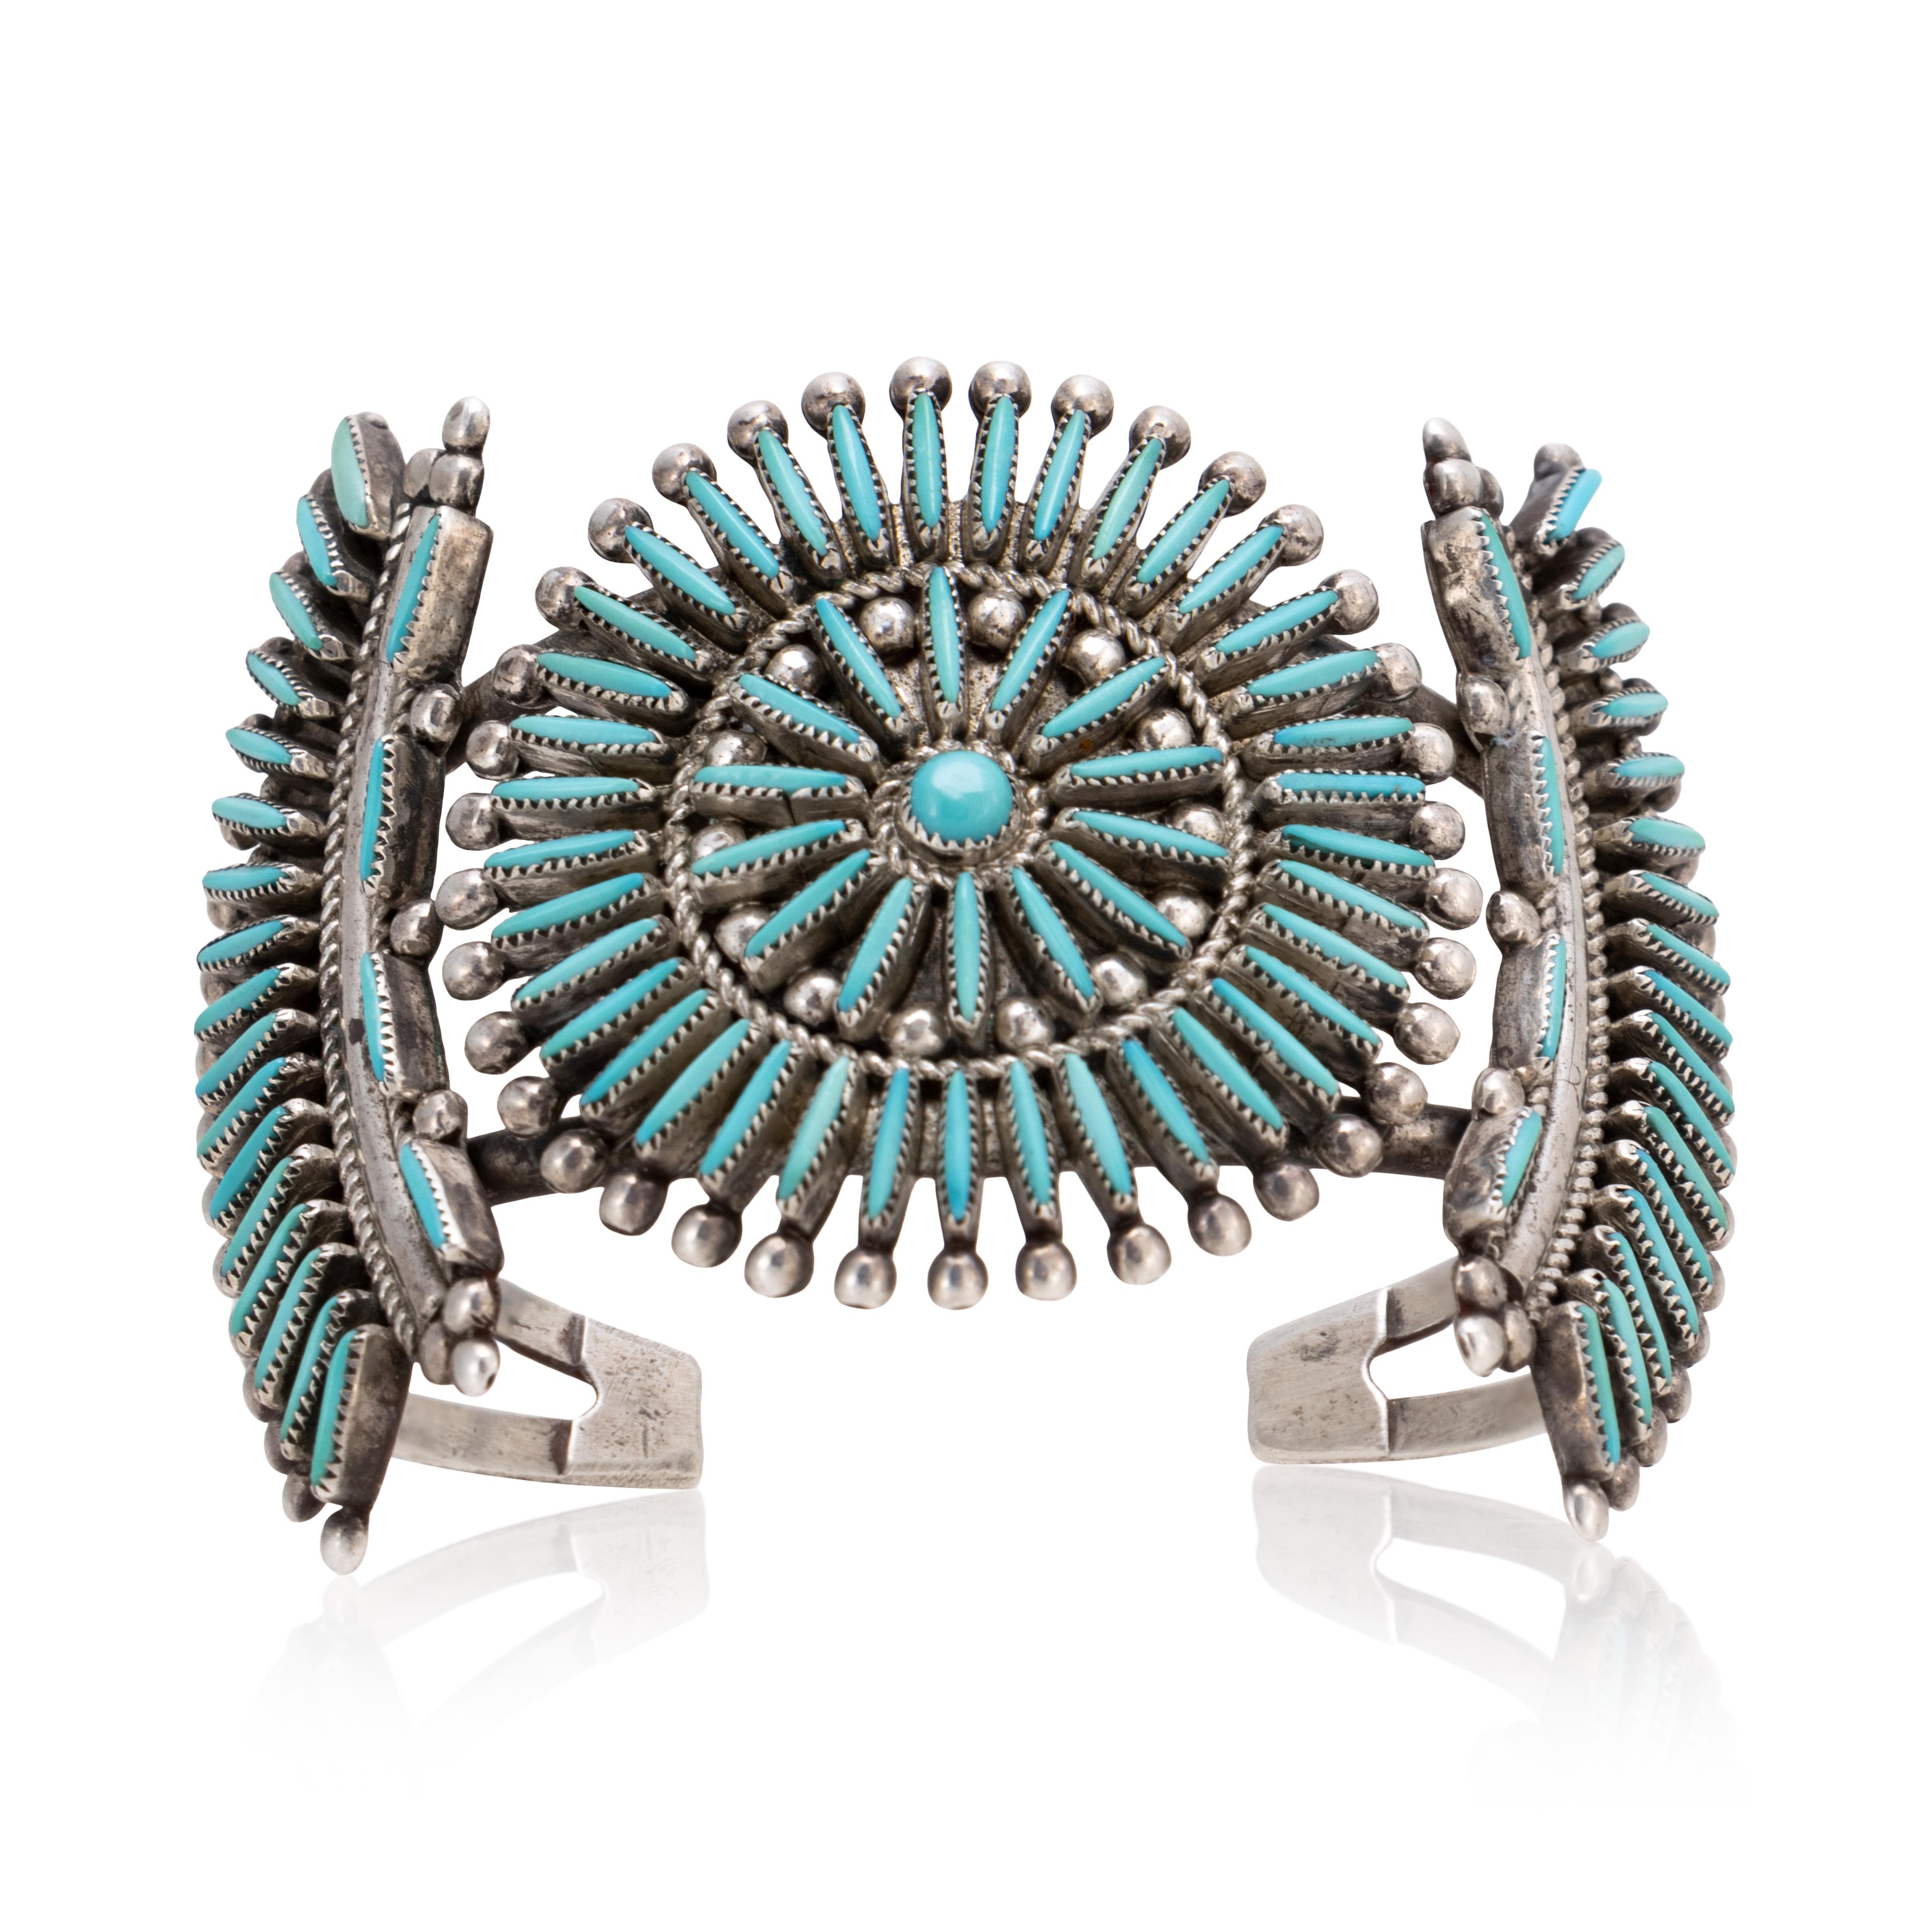 Zuni Sleeping Beauty needlepoint turquoise and sterling cuff bracelet by Lance and Cordelia Waatsa. Flexibility to tighten wrist. It is very common for Zuni husband and wife teams to make jewelry together. Usually, one will do the stone work and the